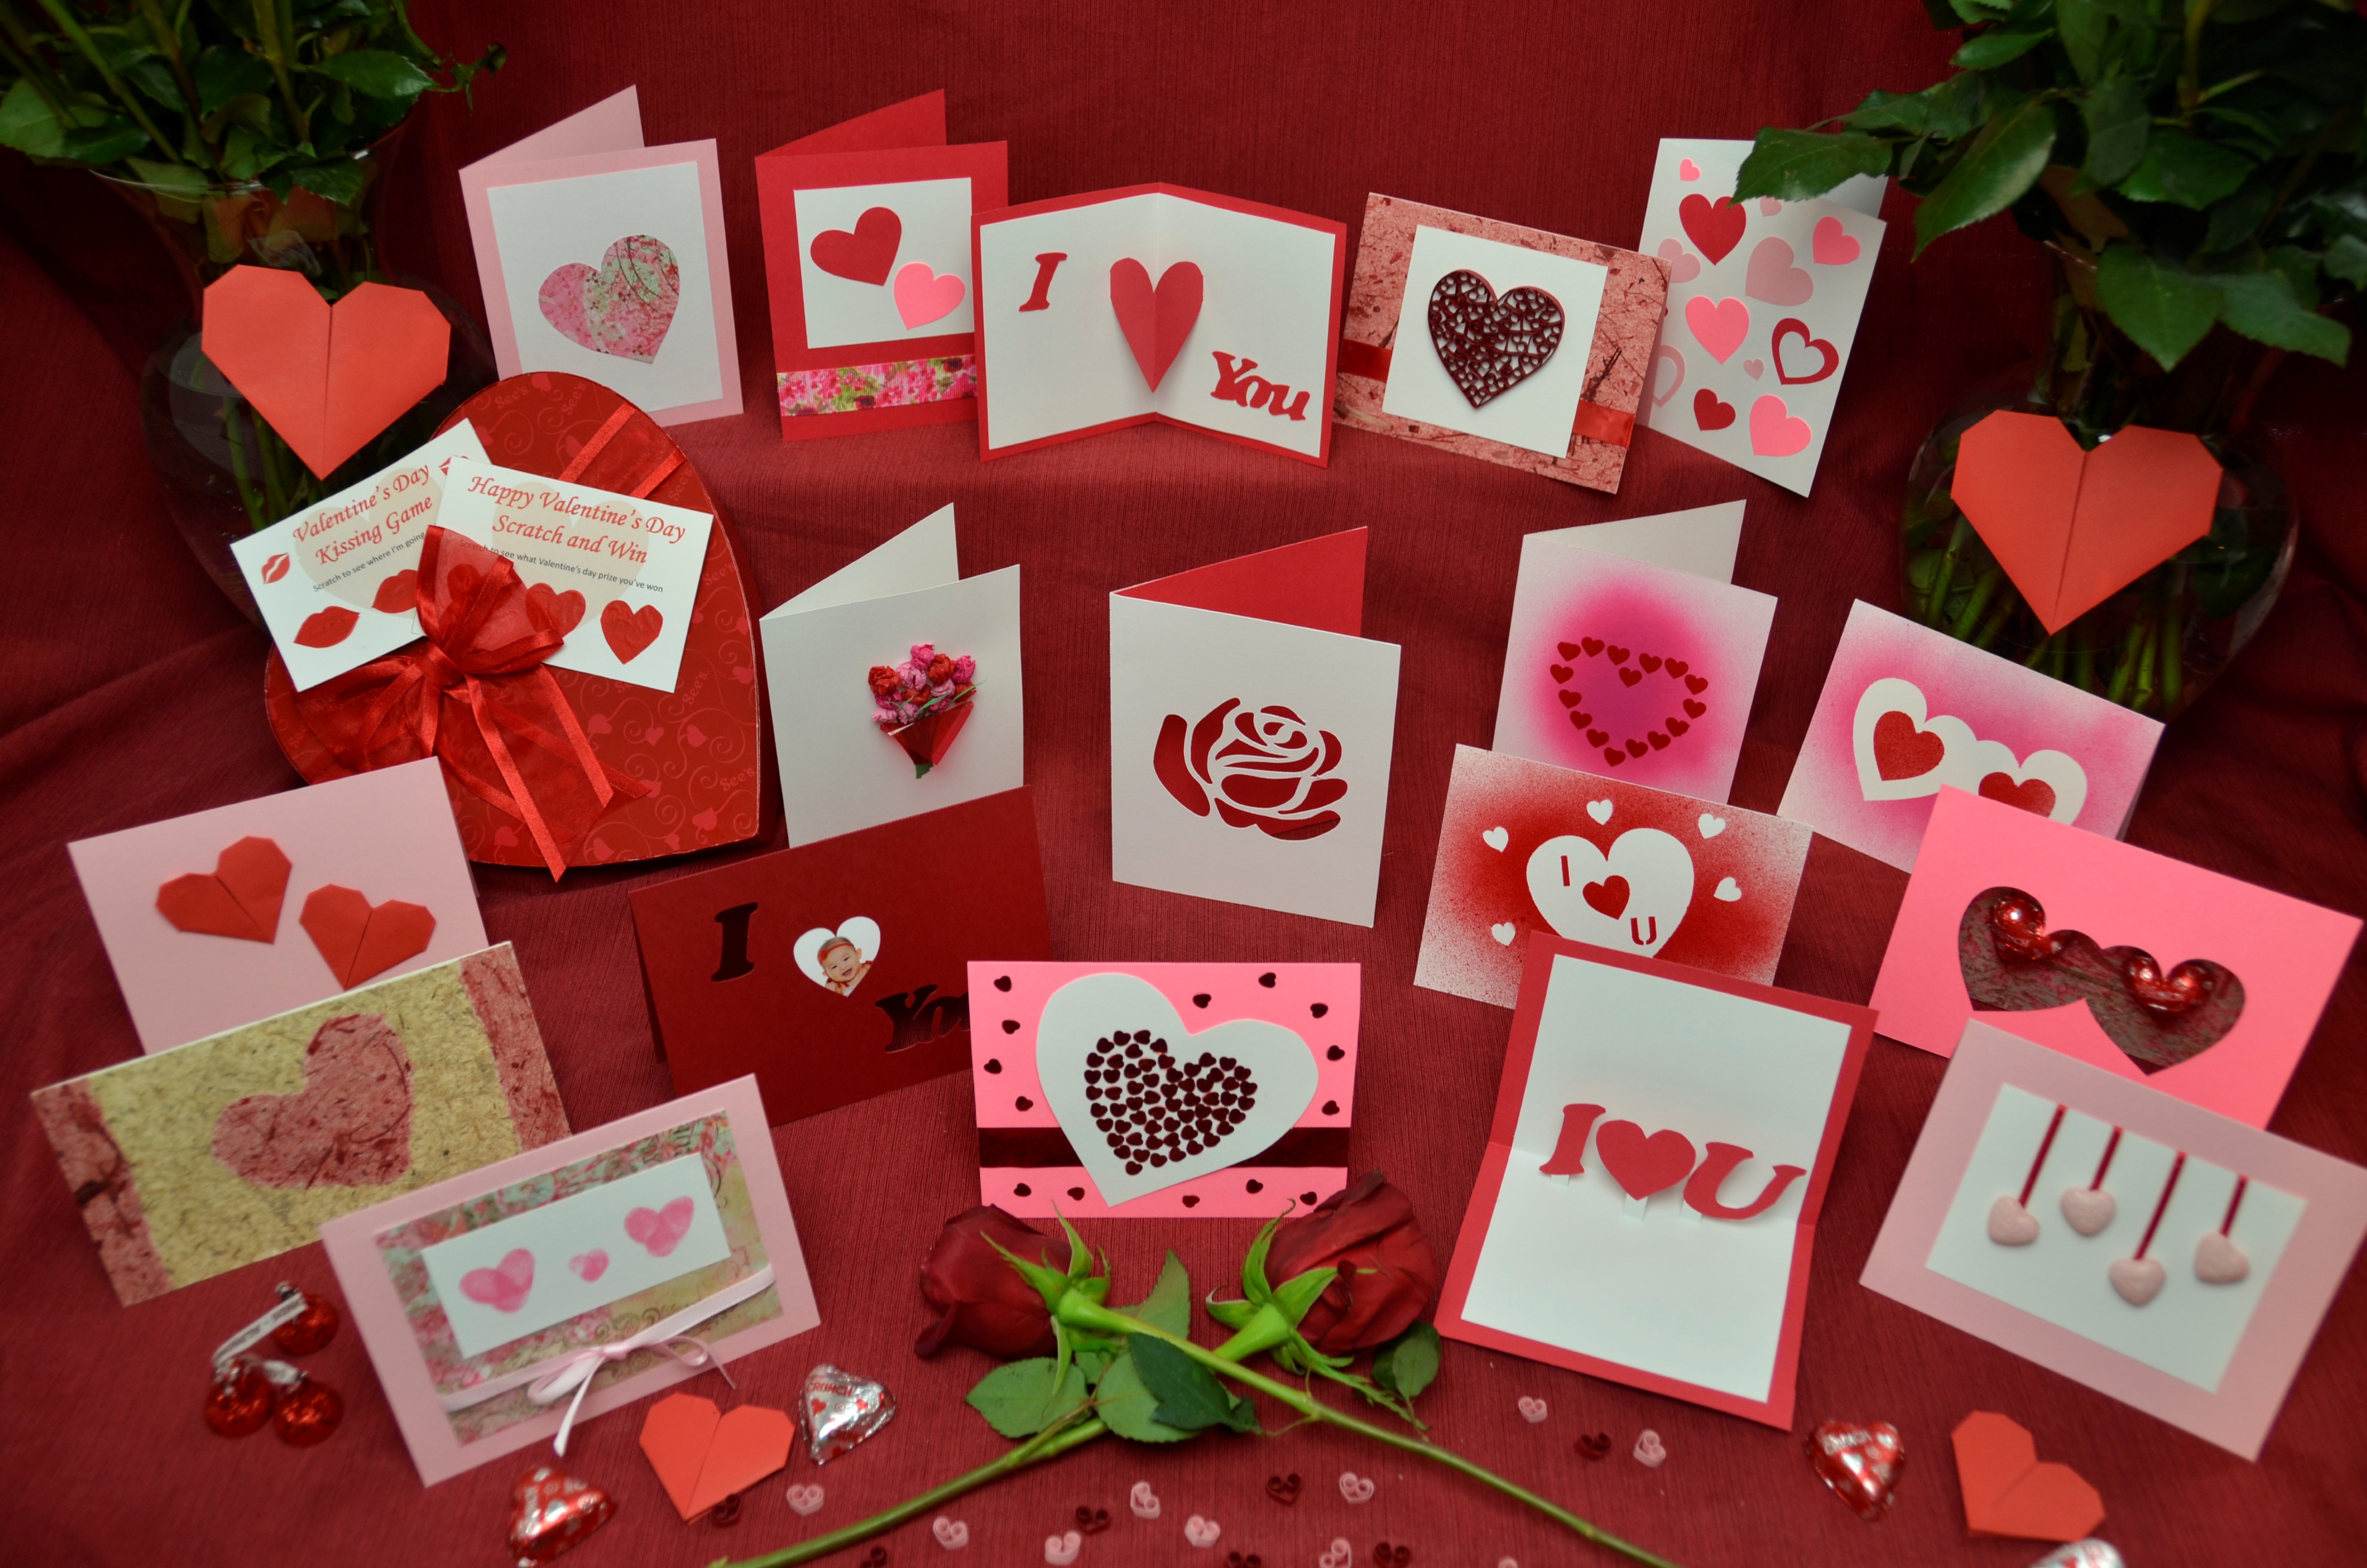 top 10 ideas for valentine's day cards - creative pop up cards